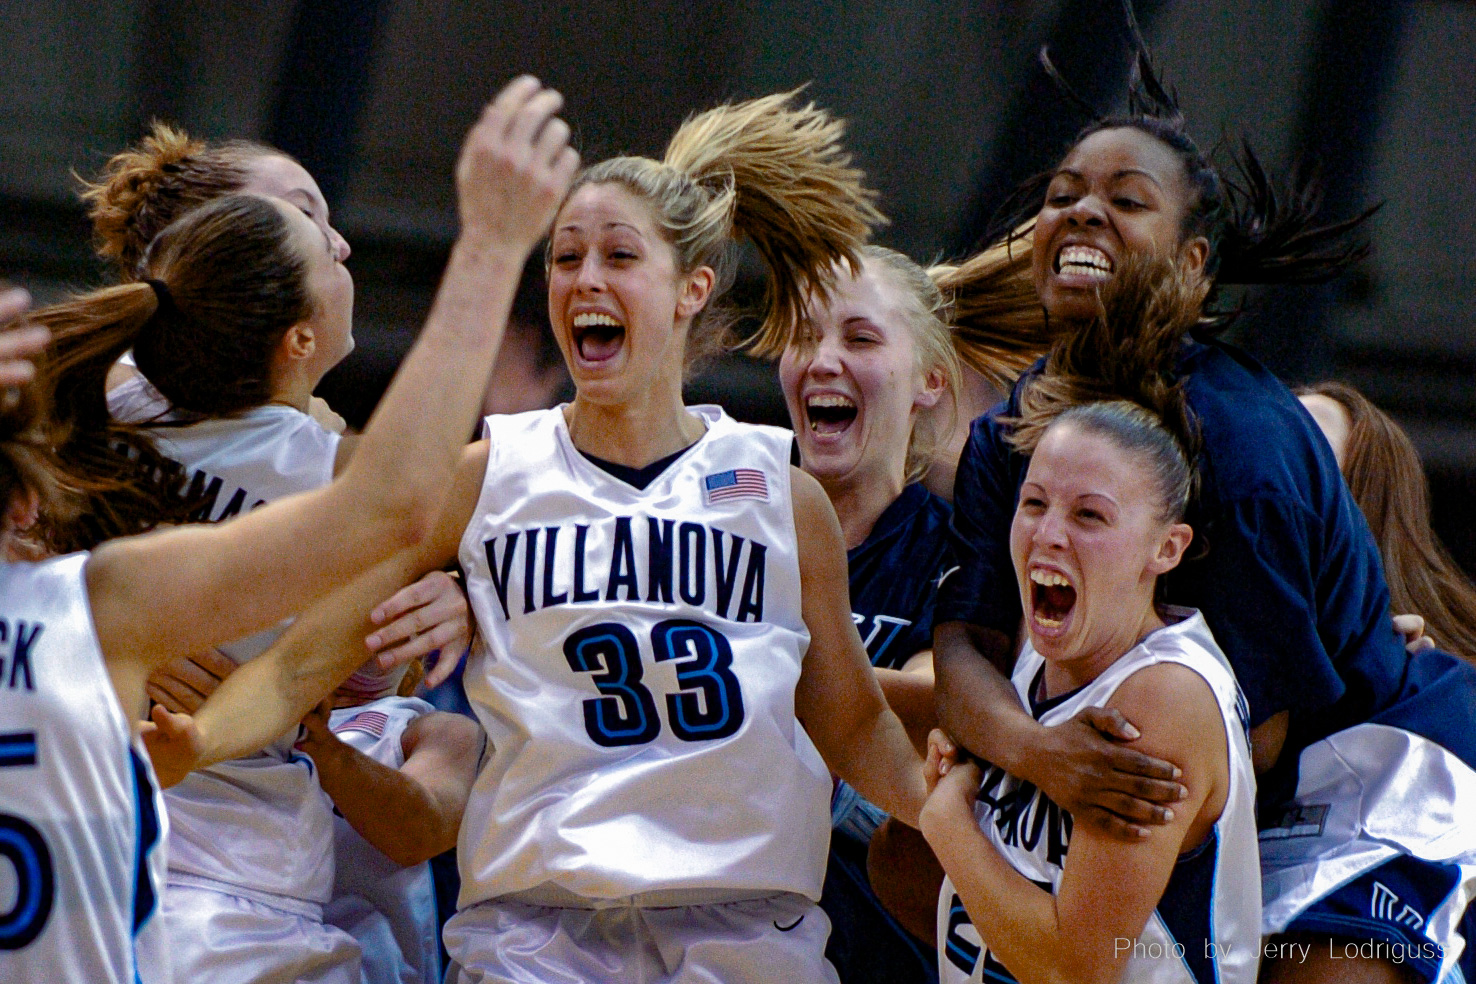 Villanova players celebrate a 59-56 upset win over the #1 ranked Connecticut Huskies. From left are Jenna Viani, Courtney Roantree, Sarita Hatcher (top), and Jennifer Hilgenberg.